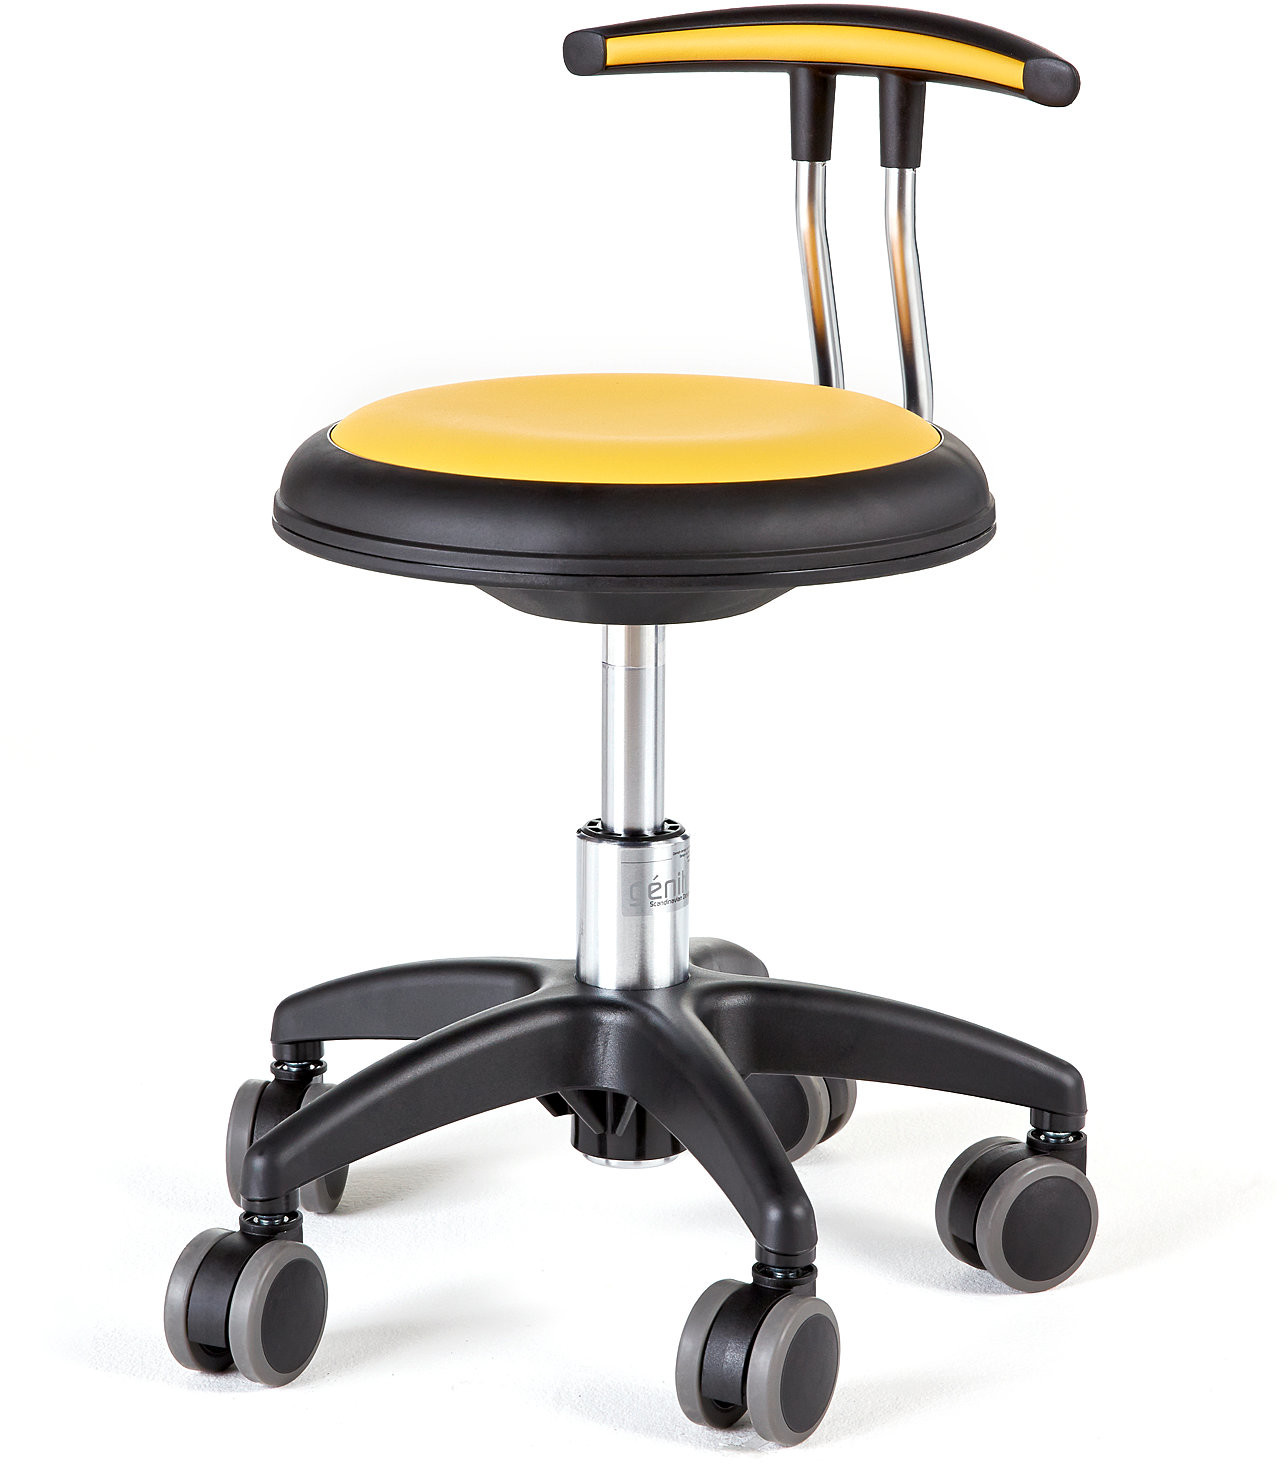 AJ Produkty e- Wheel stool Star seat height 300-380 mm. in yellow leather.